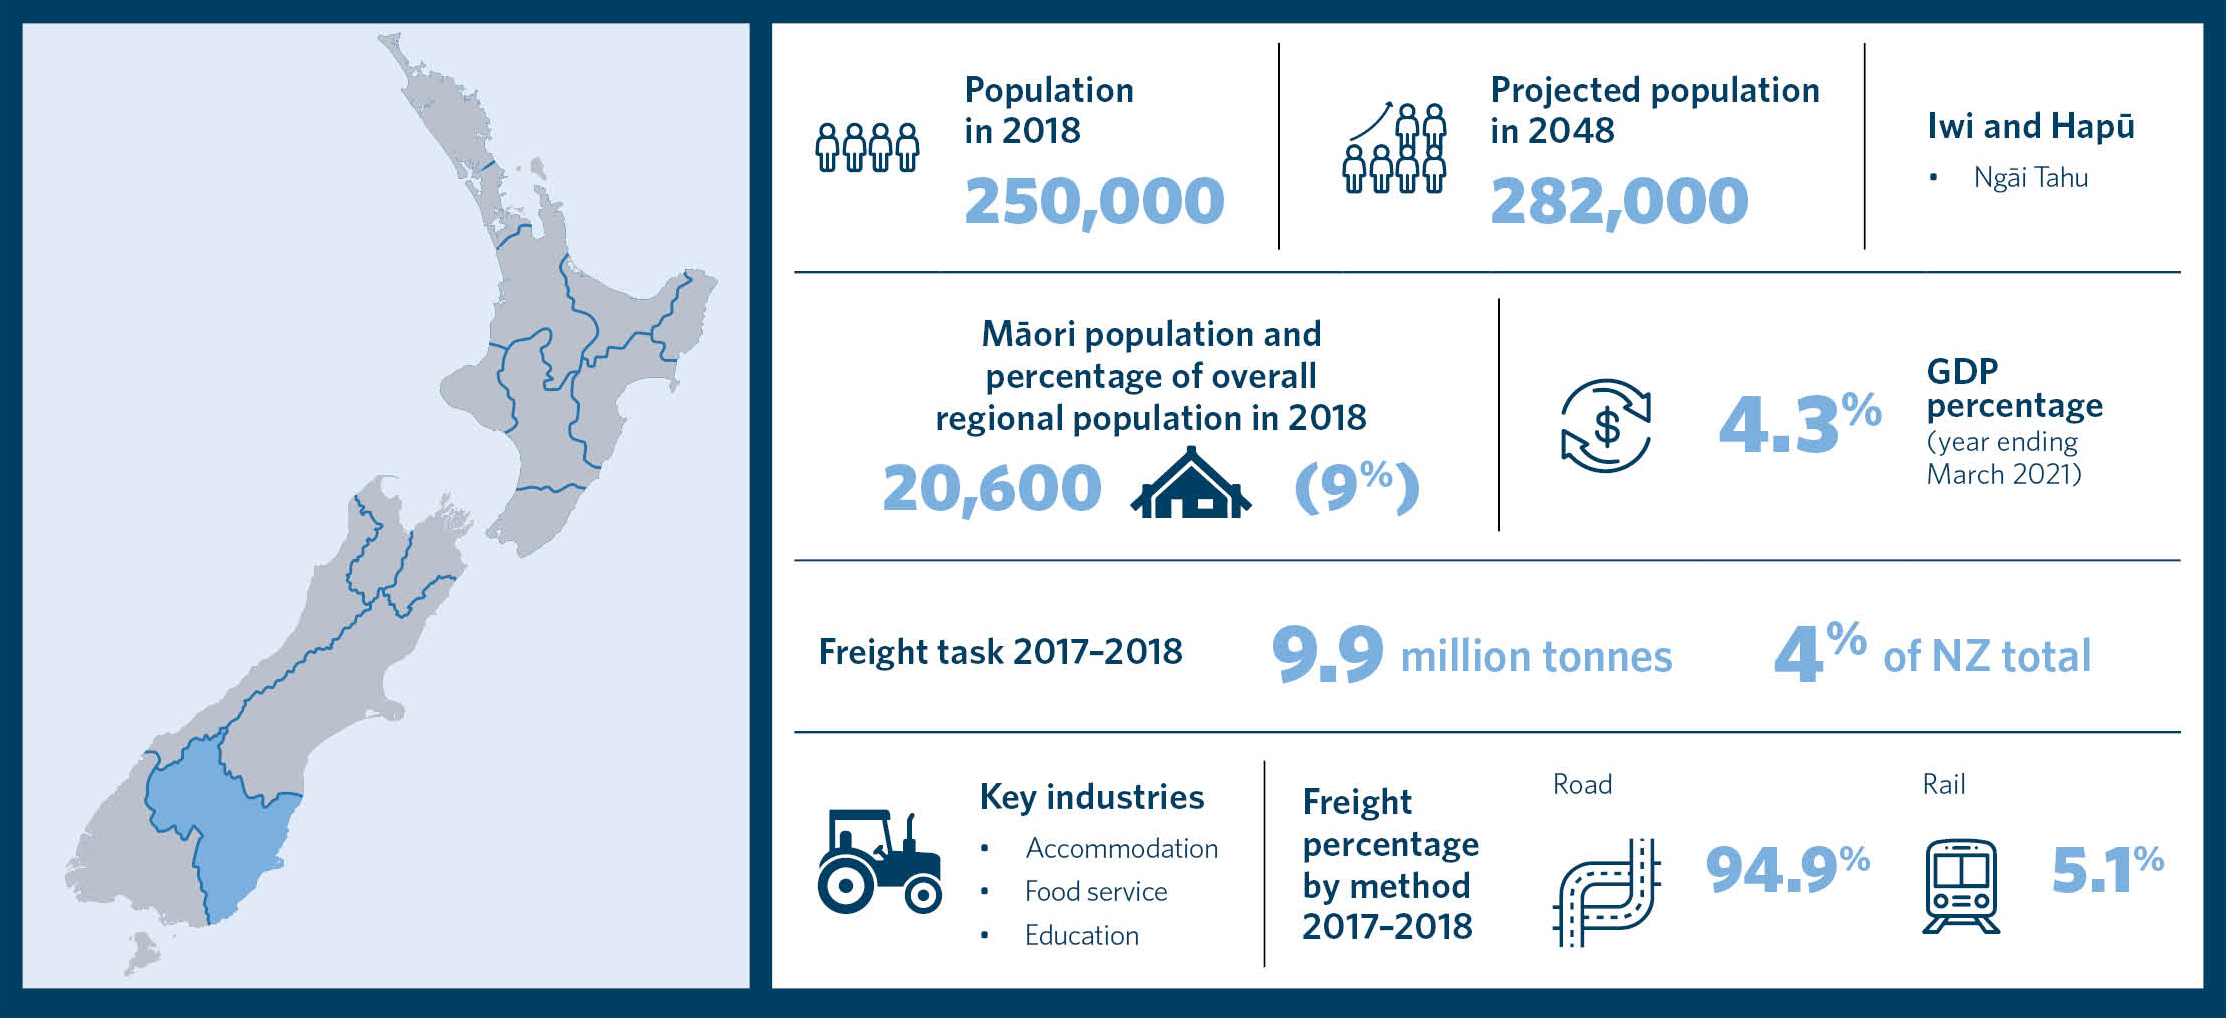 This is an infographic showing statistics for the region of Ōtākou Otago. It includes information about the population in 2018, projected population in 2048, Māori population and percentage of overall regional population in 2018, a list of iwi and hapu, G